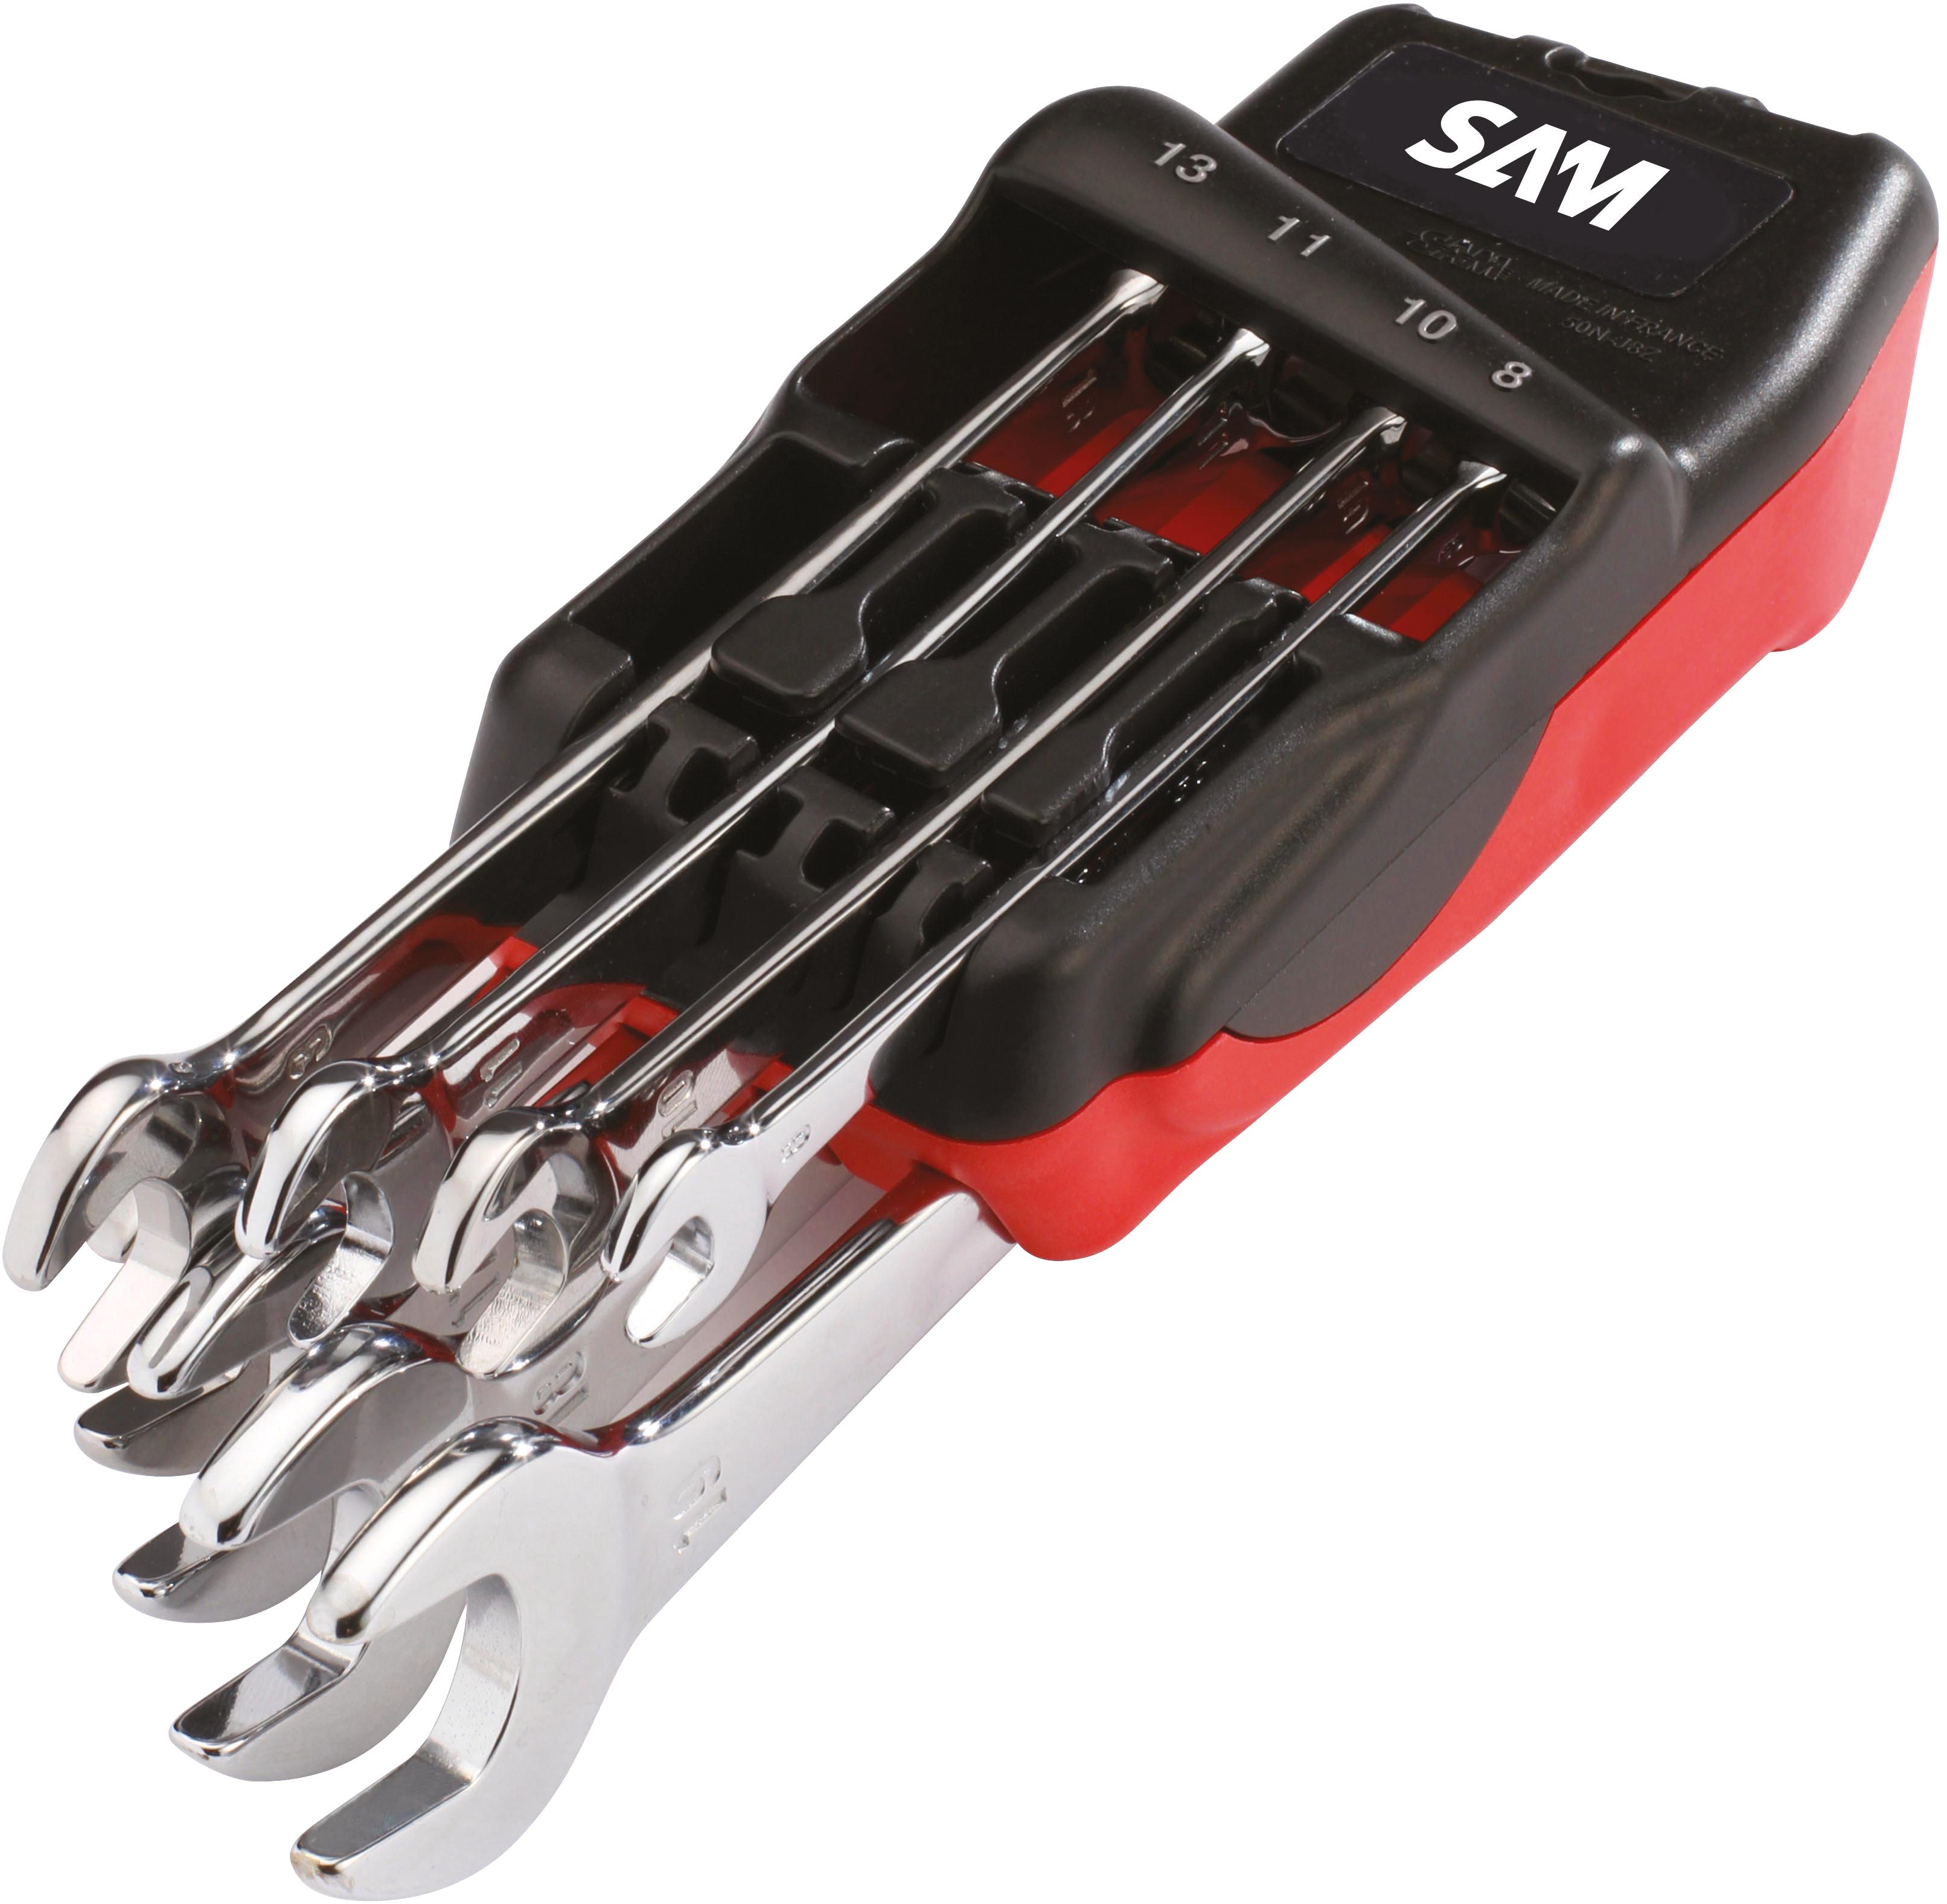 SAM Outillage 51A-J16 Combination Spanners 6 to 24 mm Set of 16